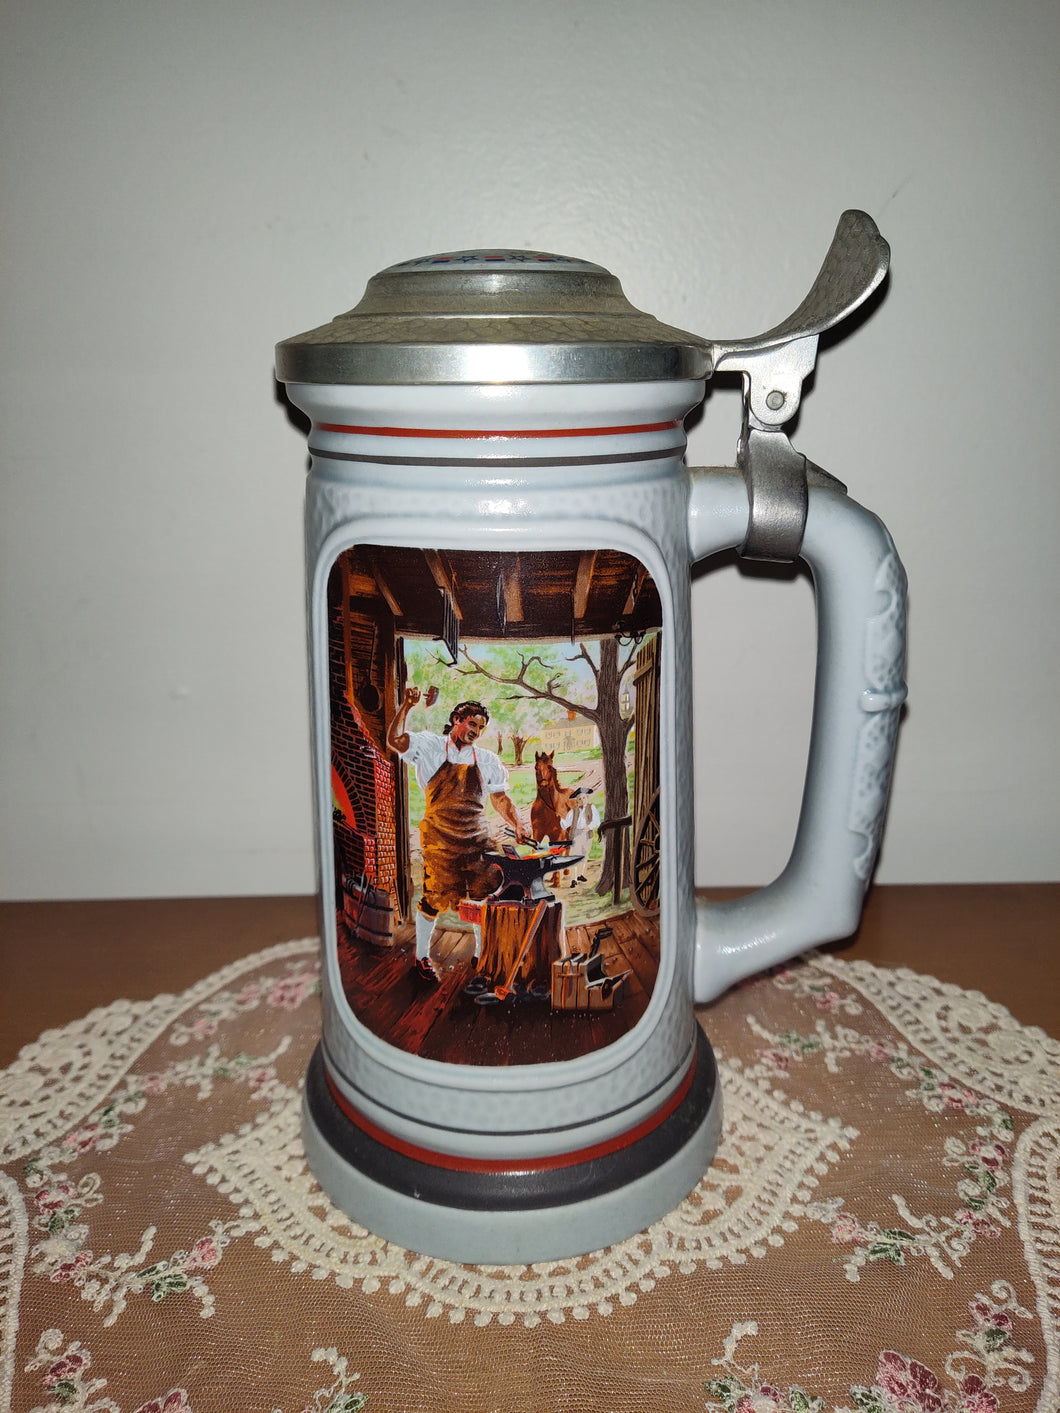 Avon The Building Of America Beer Stein Collection